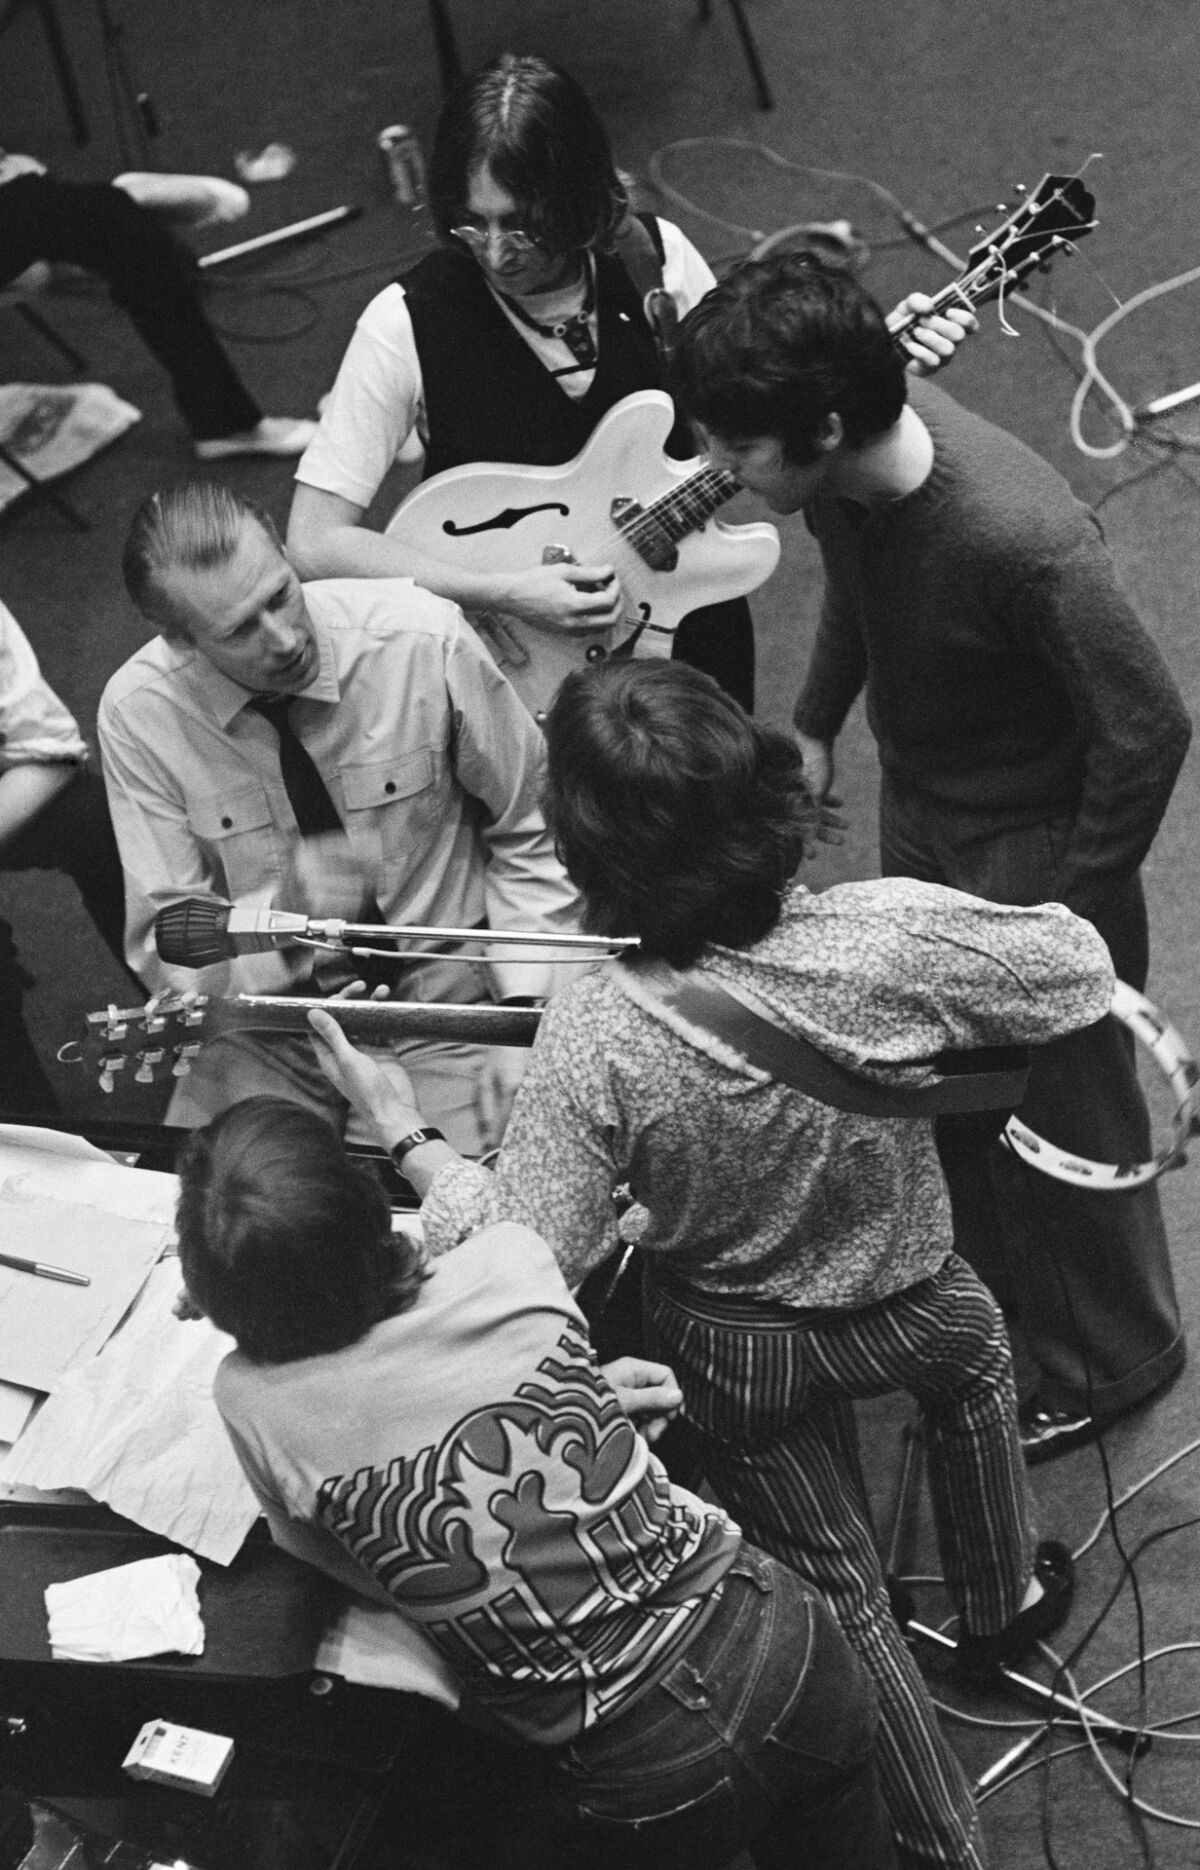 The Beatles with George Martin during a recording session at Trident Studios in 1968.